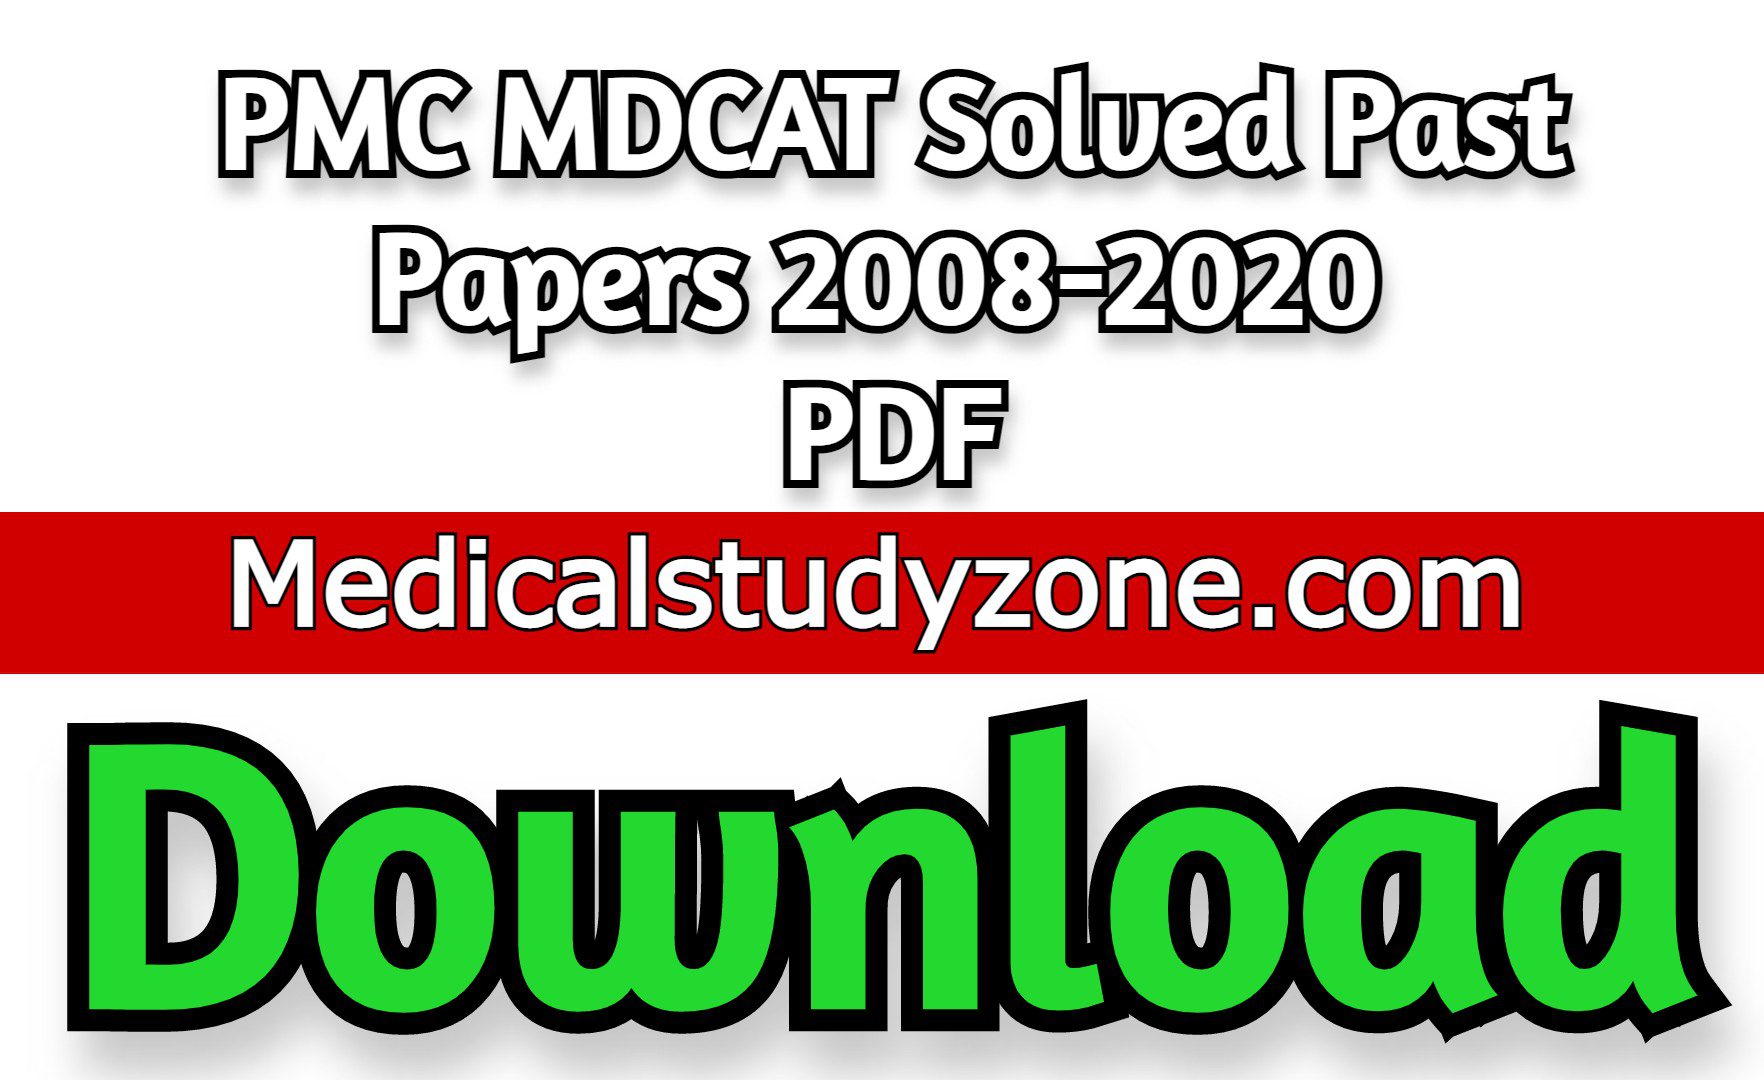 PMC MDCAT Solved Past Papers 2008-2020 PDF Free Download